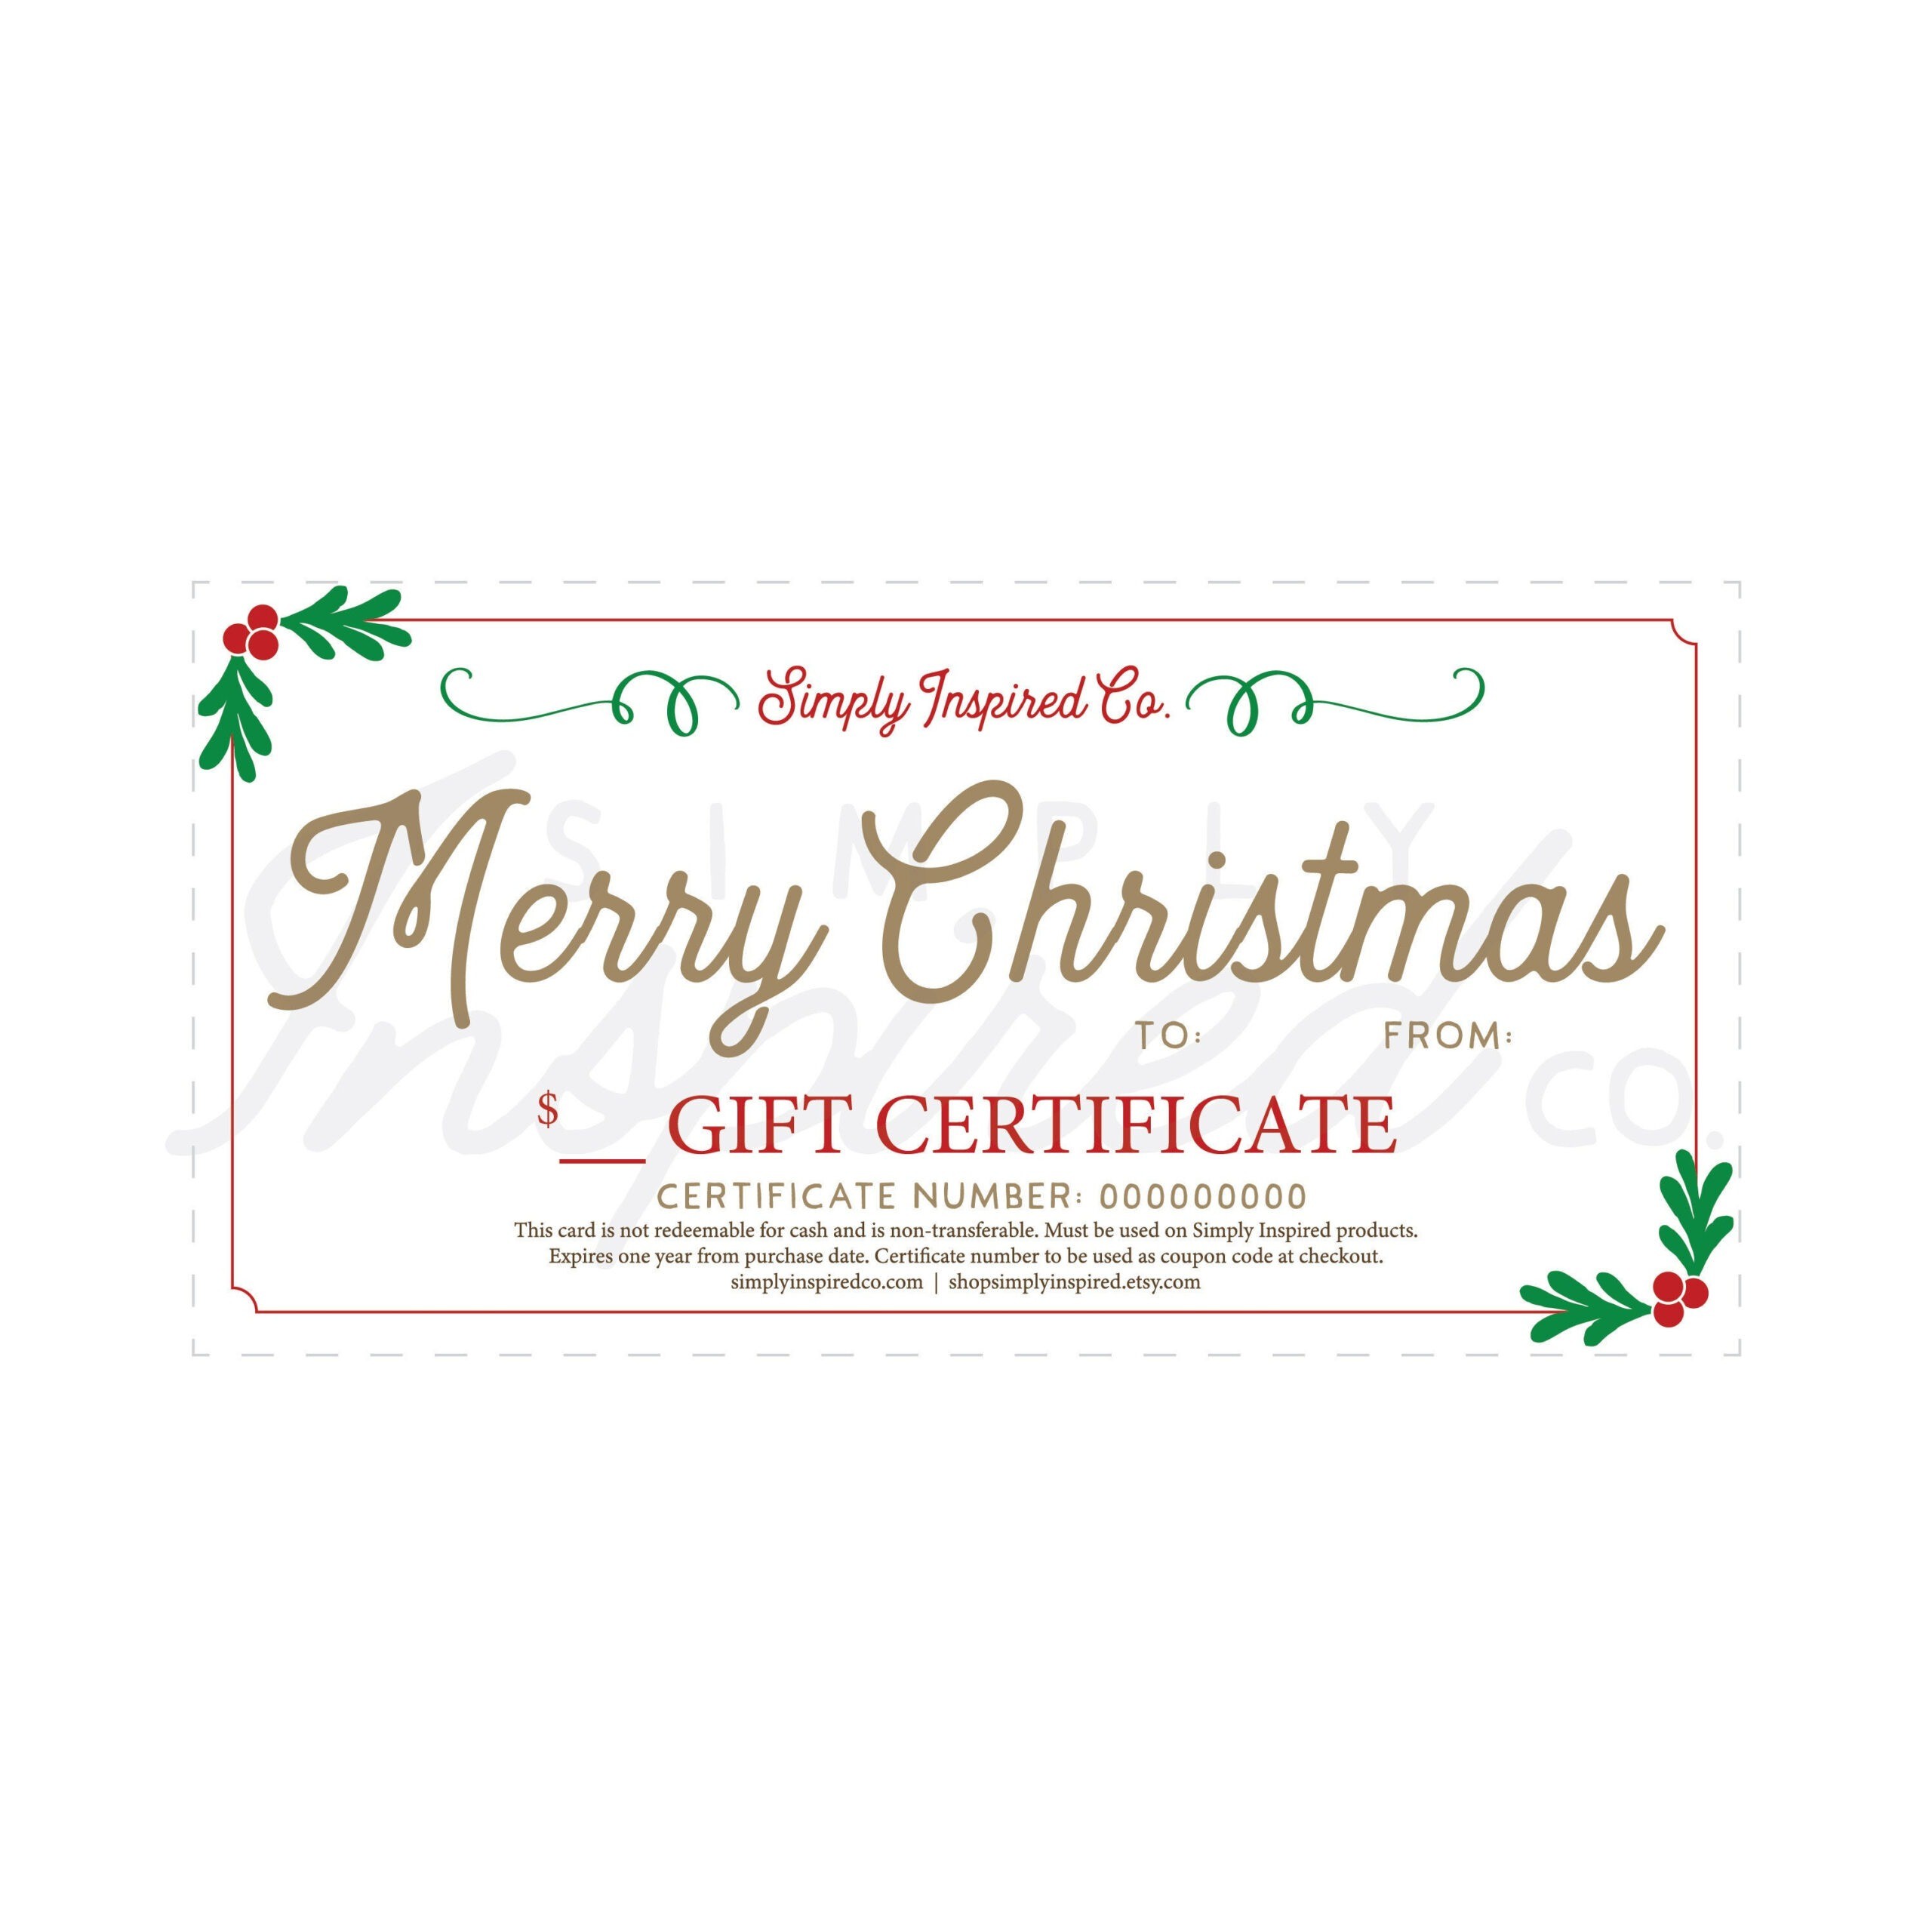 Merry Christmas Gift Certificate – Gift – Christmas – Gift Certificate –  Holidays – Giving – Presents – Gift Card – Simply Inspired Intended For Merry Christmas Gift Certificate Templates